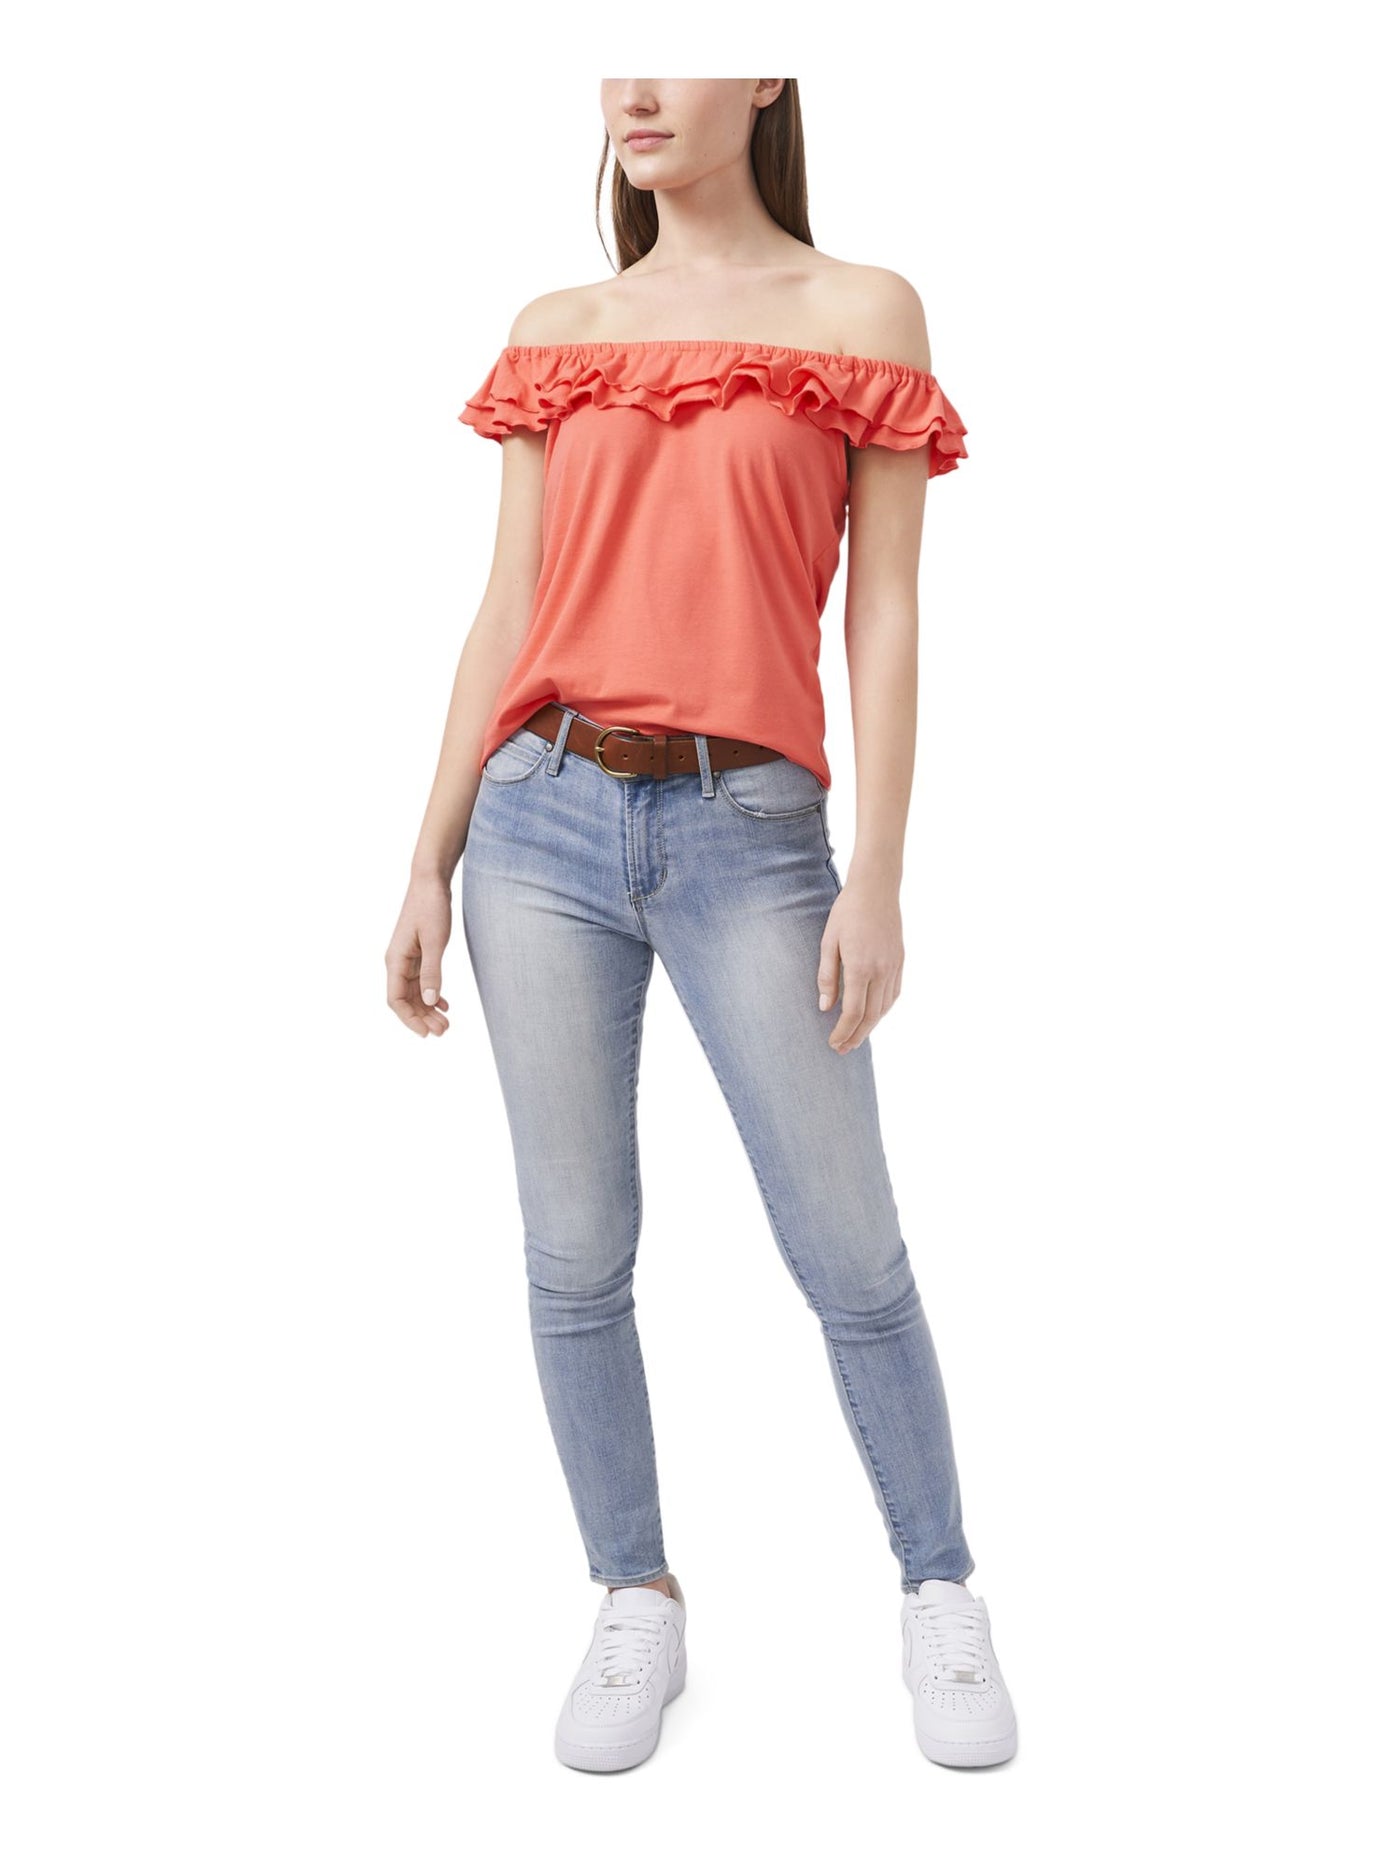 RILEY&RAE Womens Coral Stretch Ruffled Flutter Sleeve Off Shoulder Top XXL